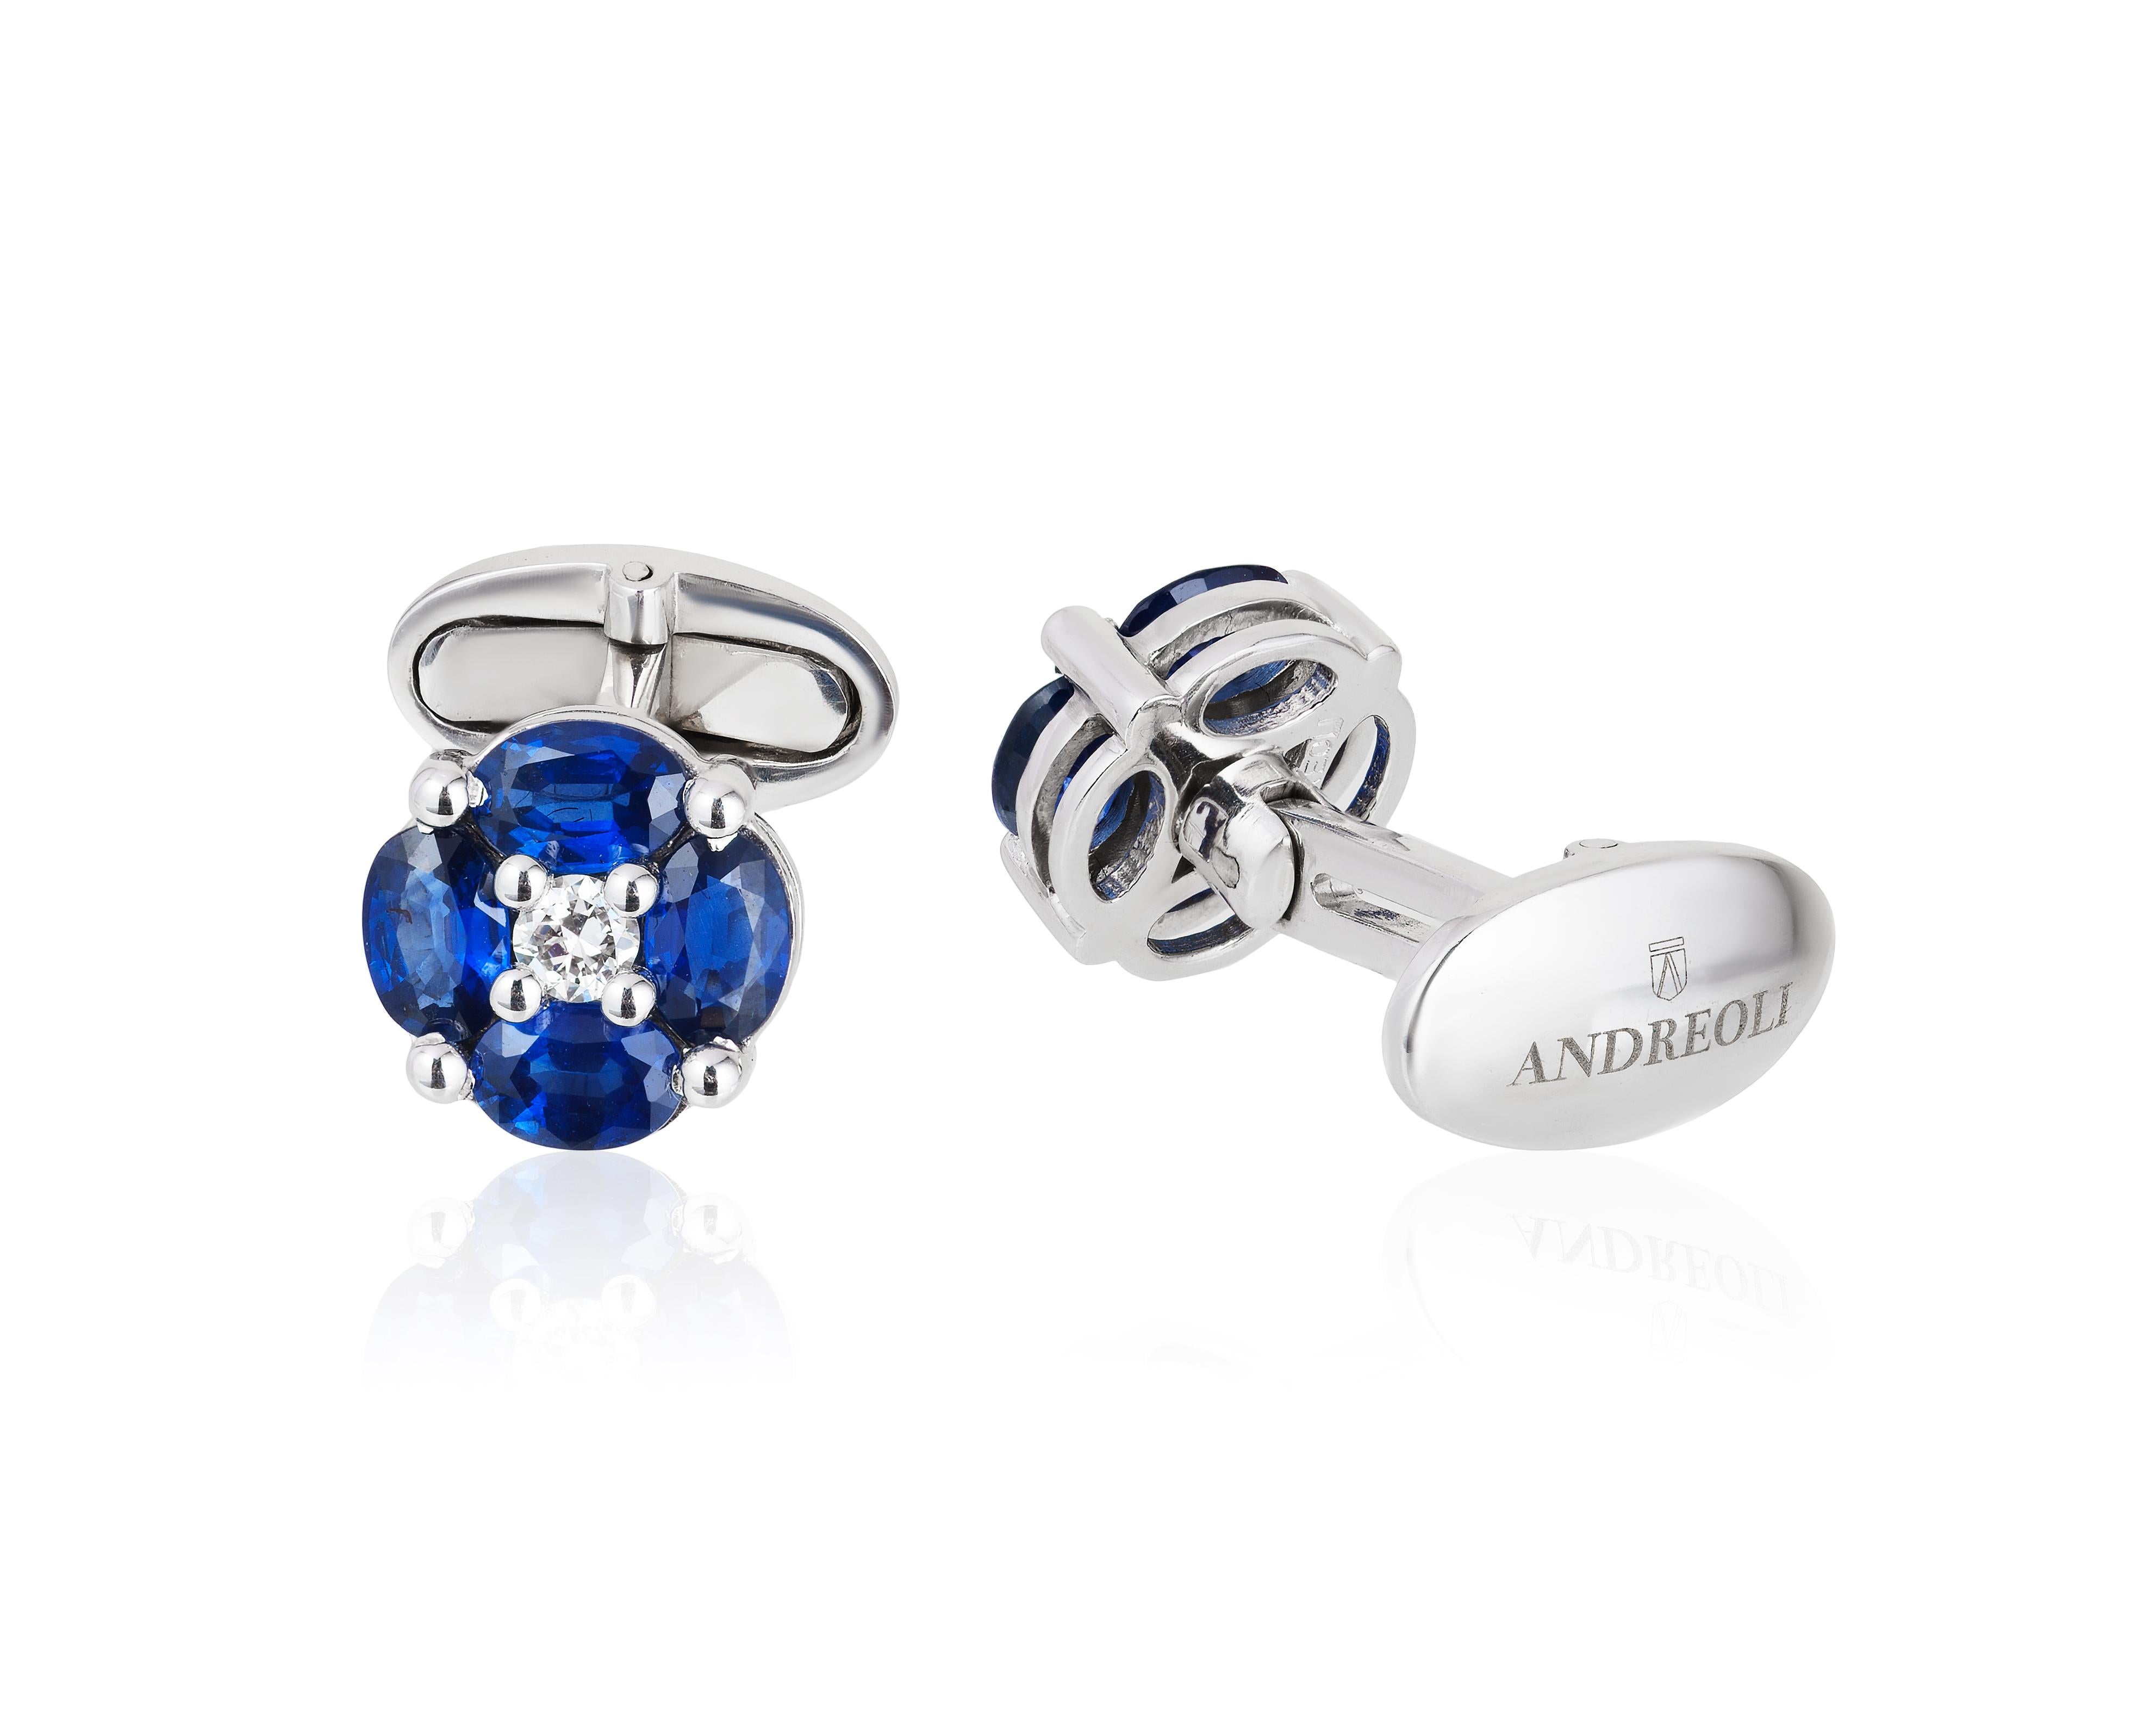 Andreoli 4.45 Carat Blue Sapphire 18 Karat White Gold Cufflinks. These cufflinks features 4.45 carats of eight oval Blue sapphires. Centered with two round diamonds weighing 0.30 carats. Set in 15.56 grams of 18 Karat White Gold. Made in the USA by